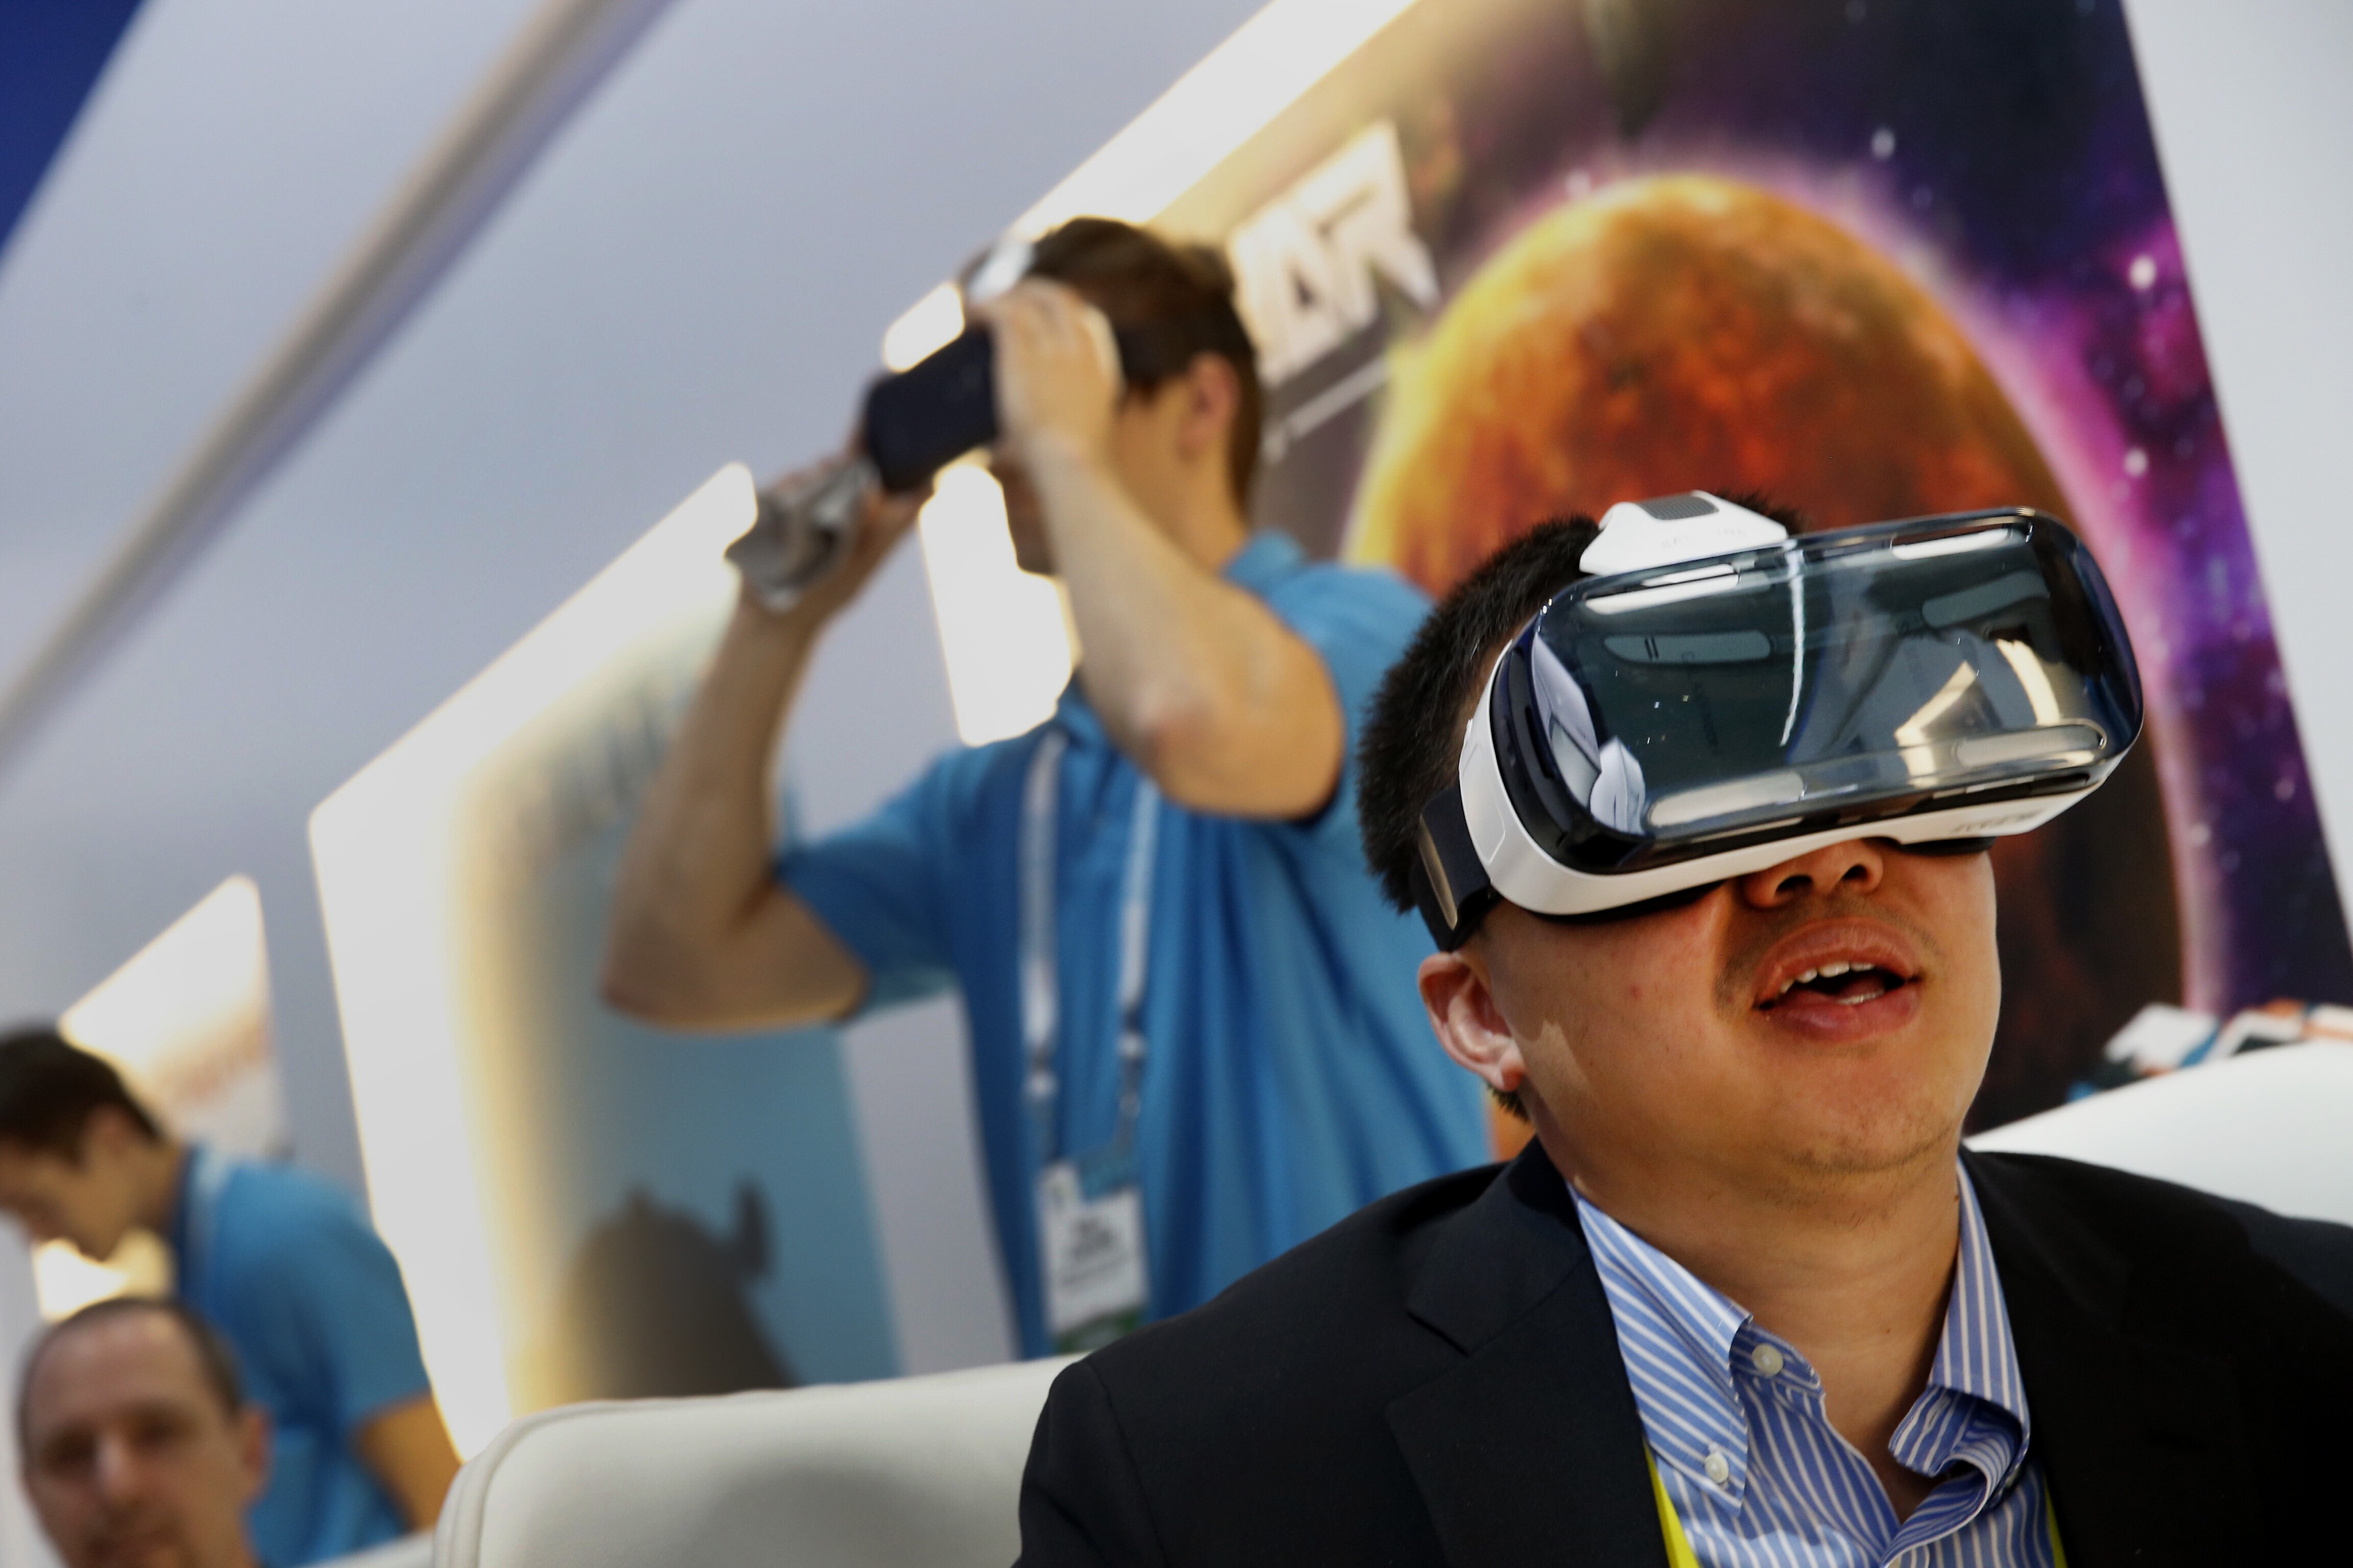 An attendee during the 2015 Consumer Electronics Show (CES) in Las Vegas, Nevada, U.S., on Tuesday, Jan. 6, 2015. (Patrick T. Fallon&mdash;Patrick T. Fallon)